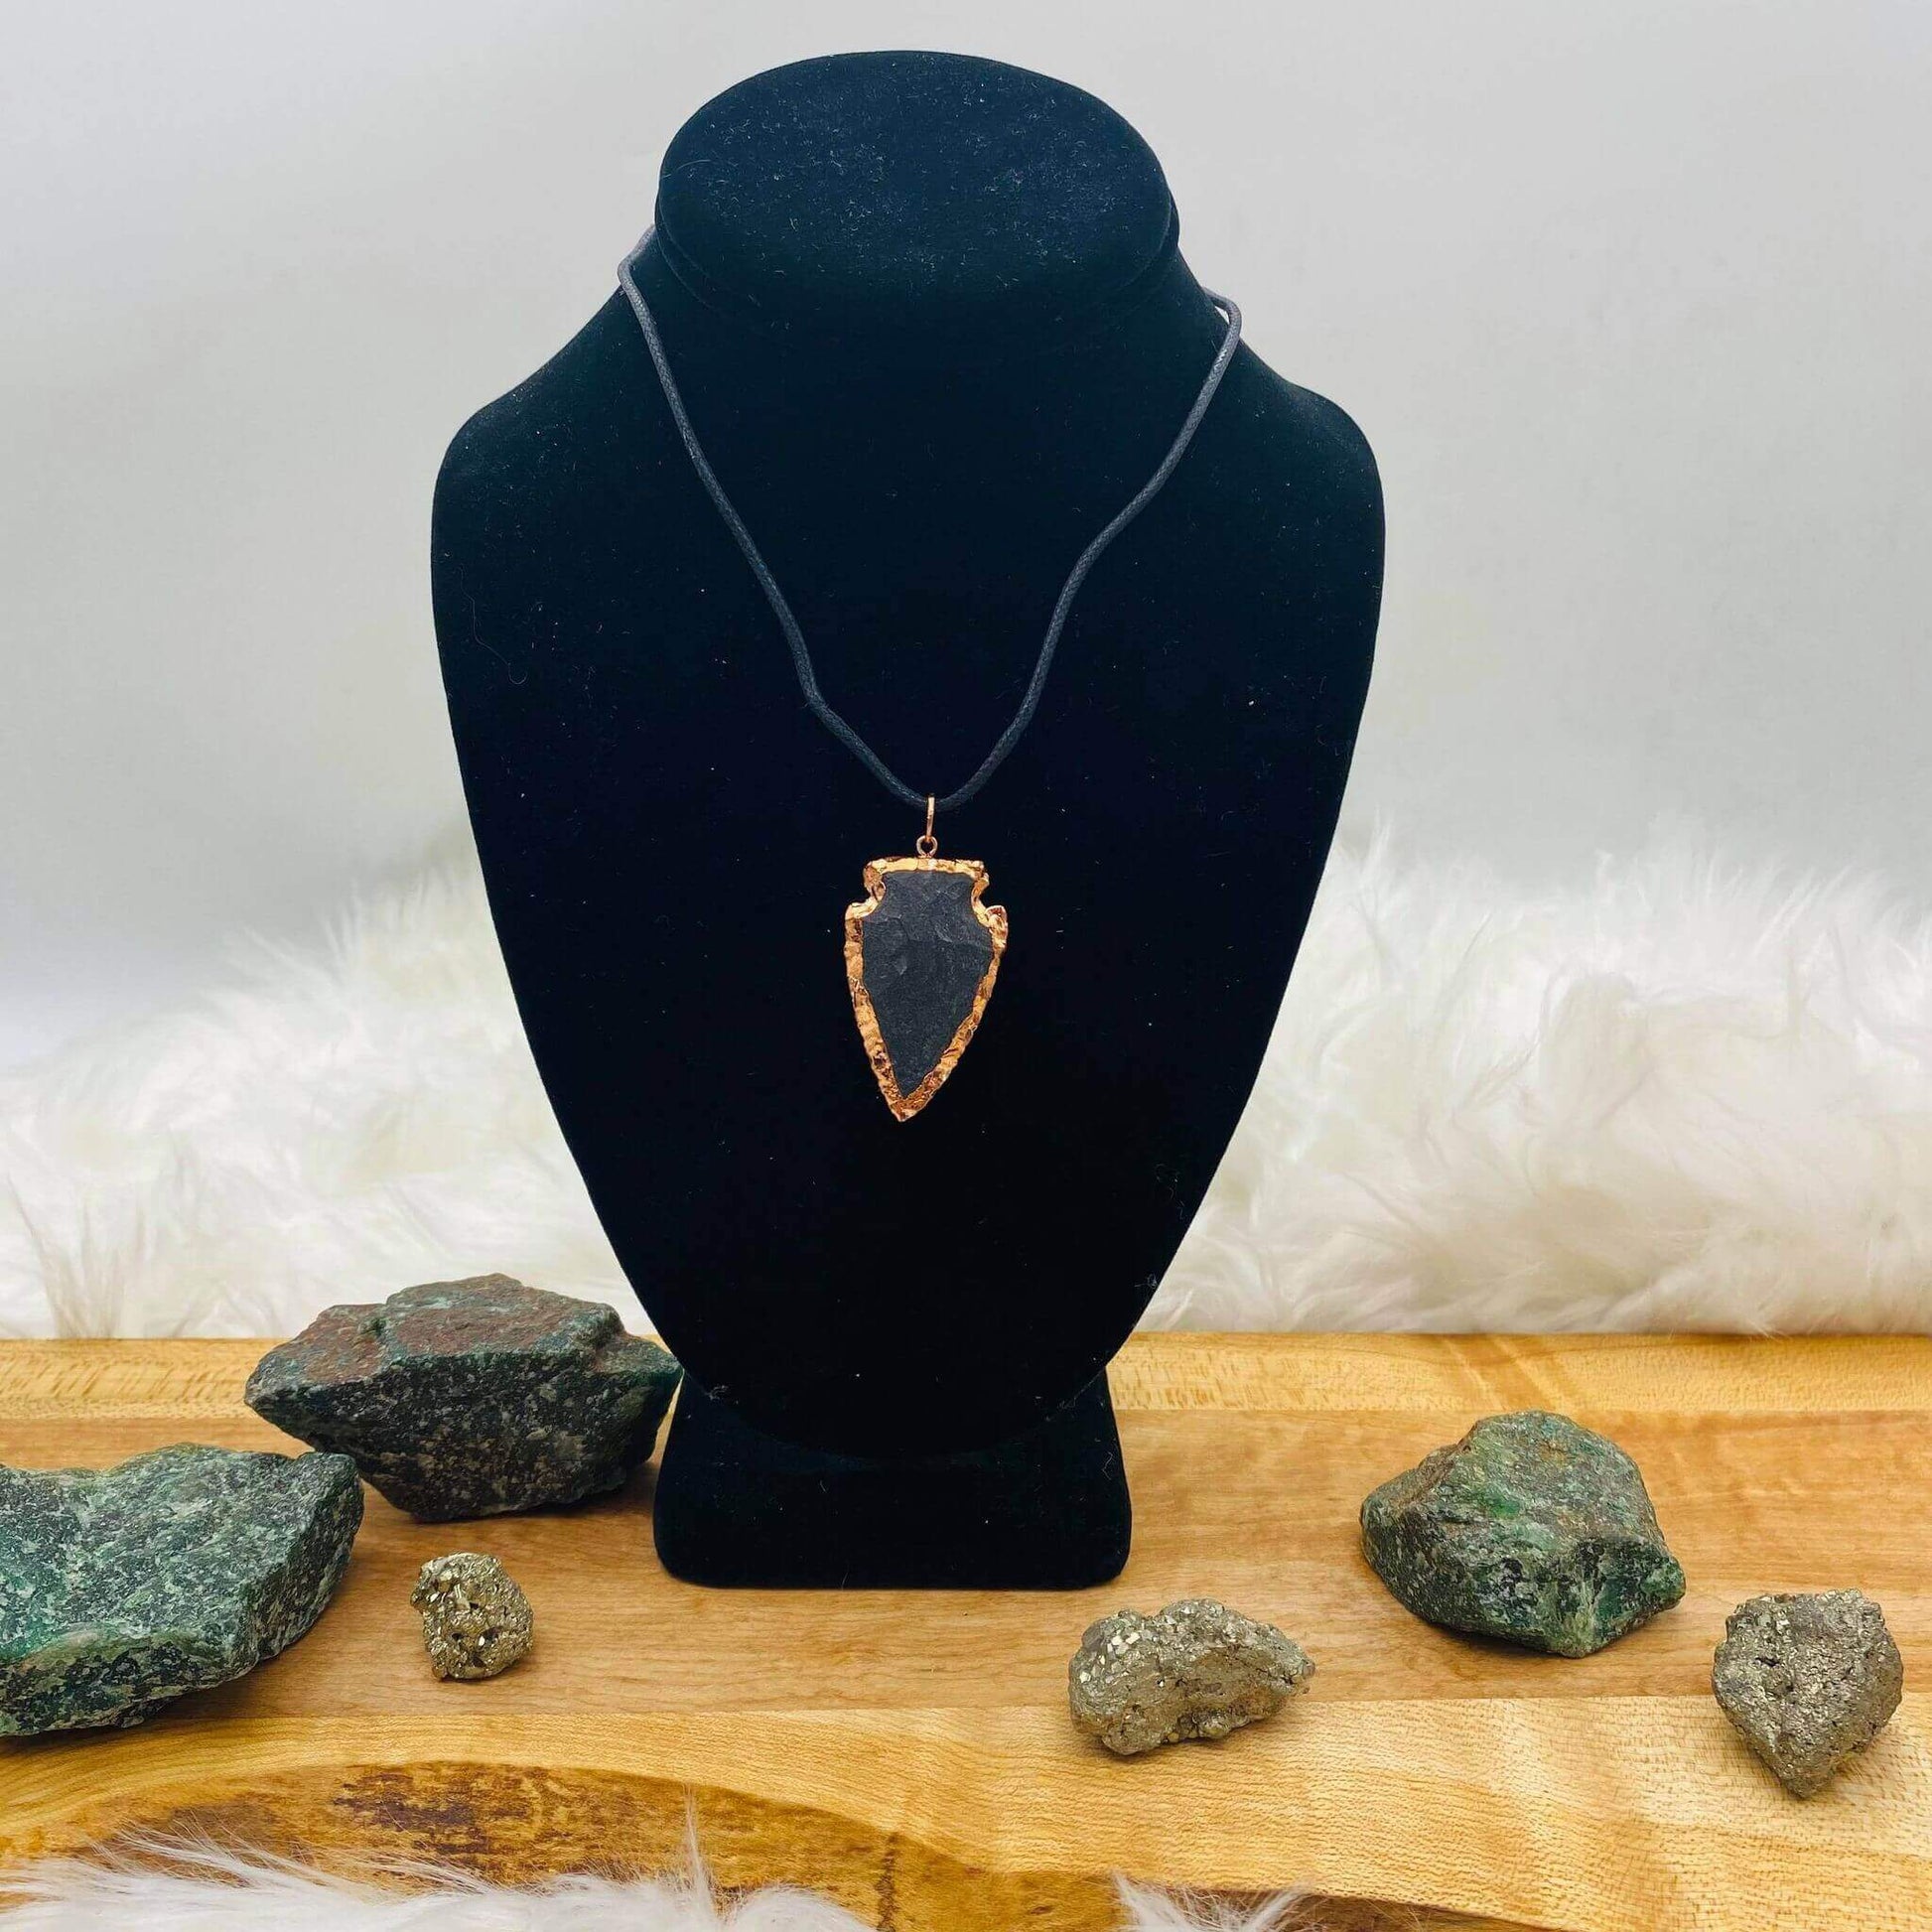 Black Obsidian Arrowhead Necklace at $25 only from Spiral Rain